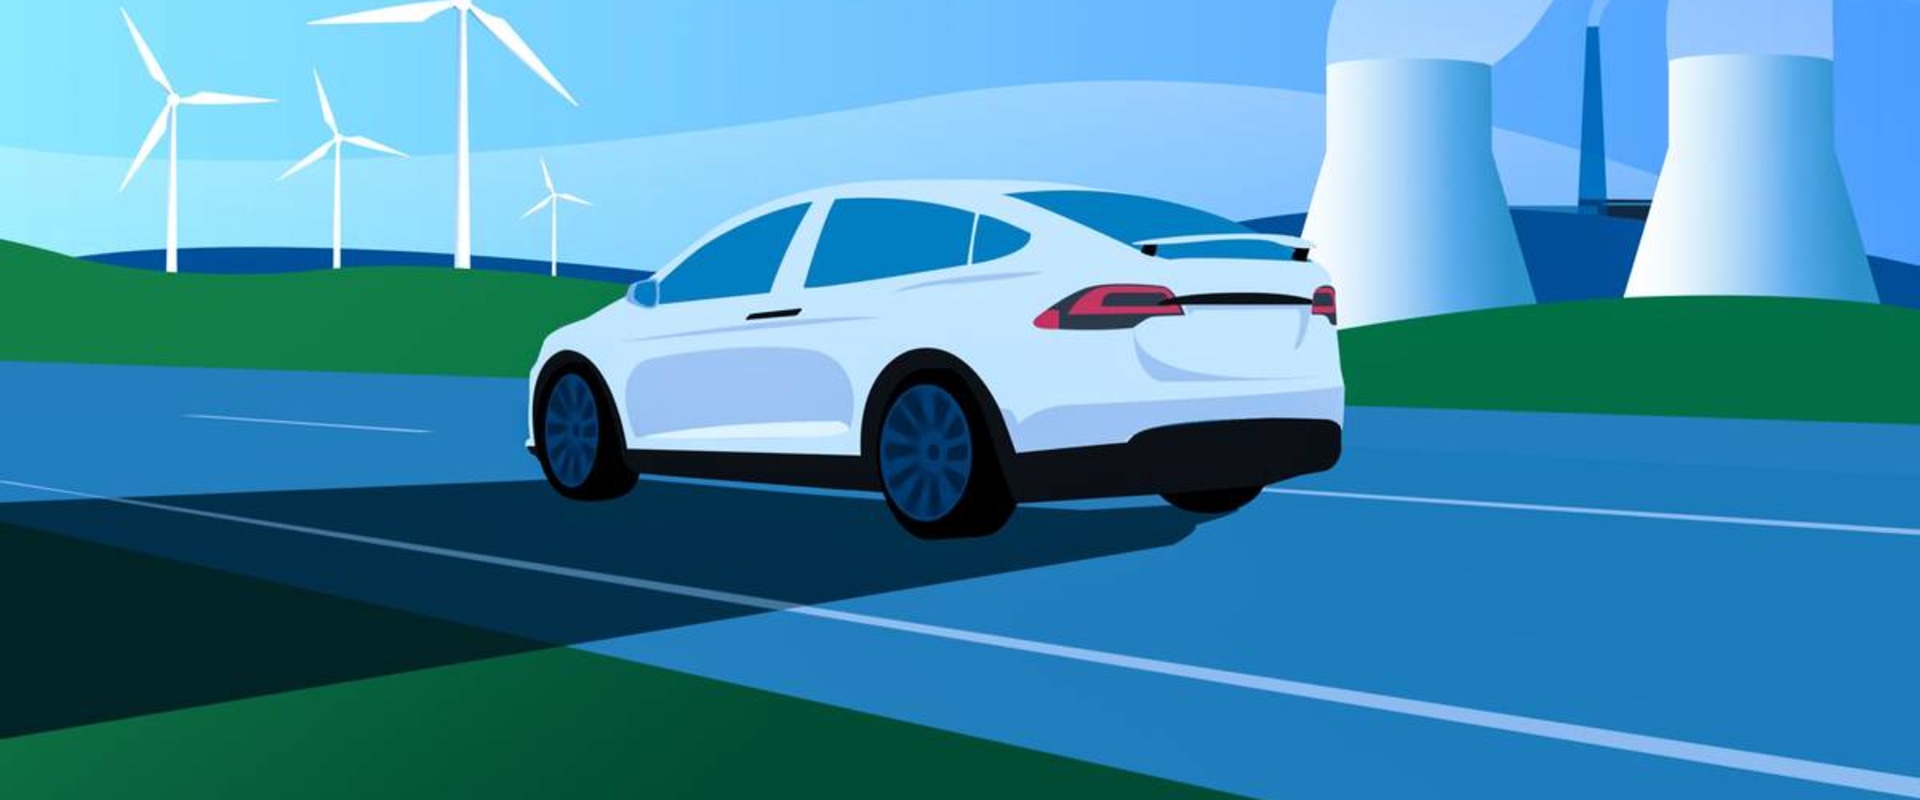 The Environmental Benefits of Driving an Electric Vehicle